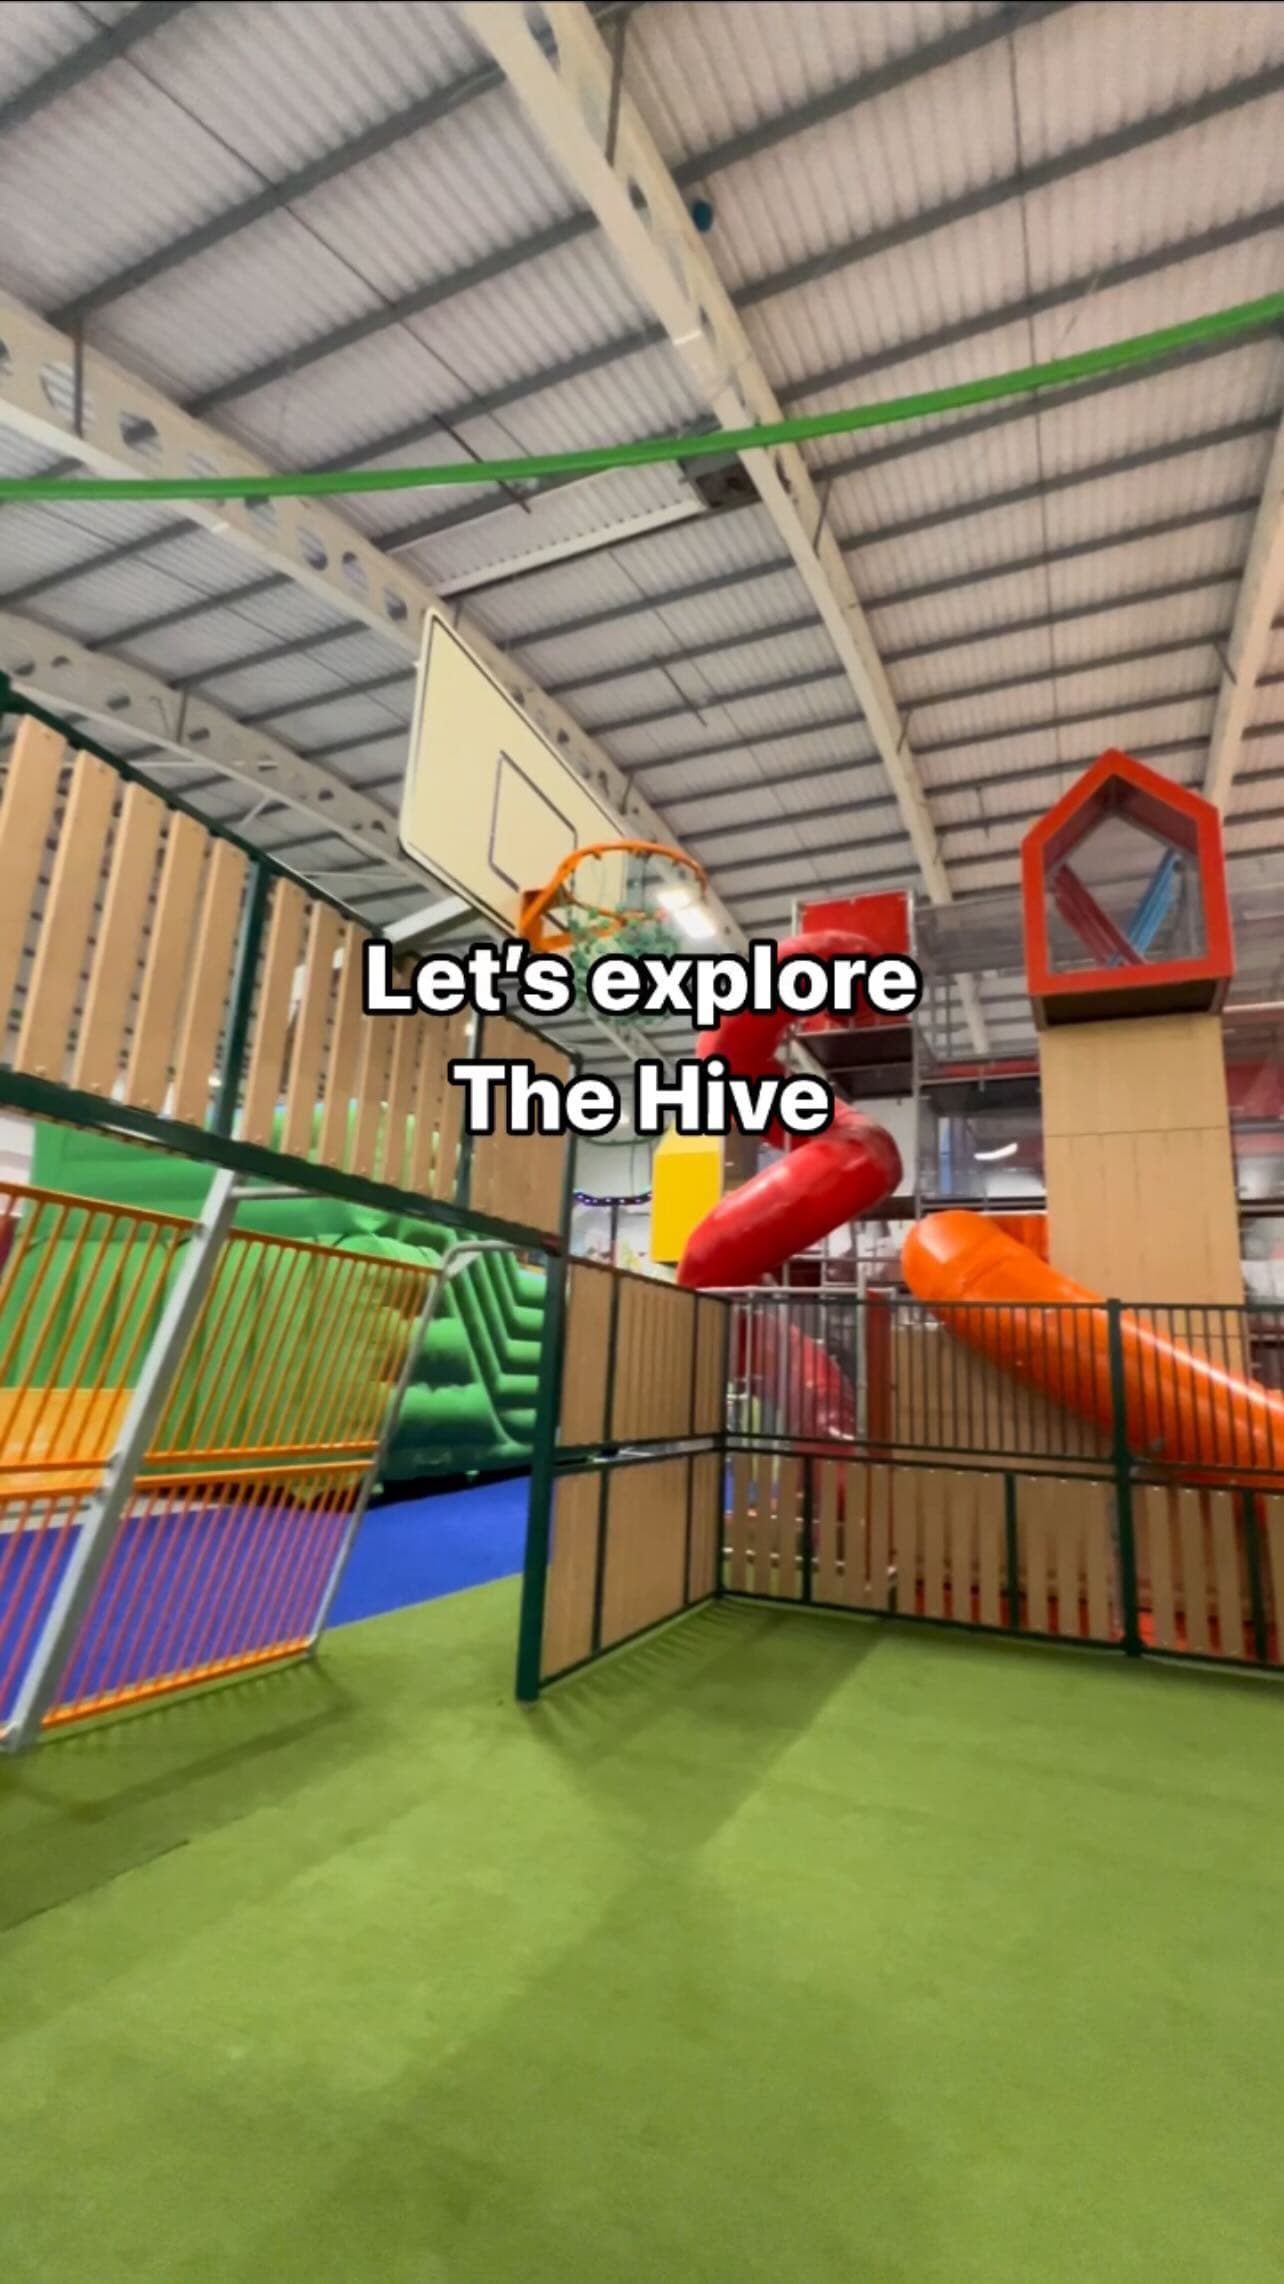 No Monday blues here! 🤭🛝🎳🥞✨

What do you love most about The Hive? 🤩